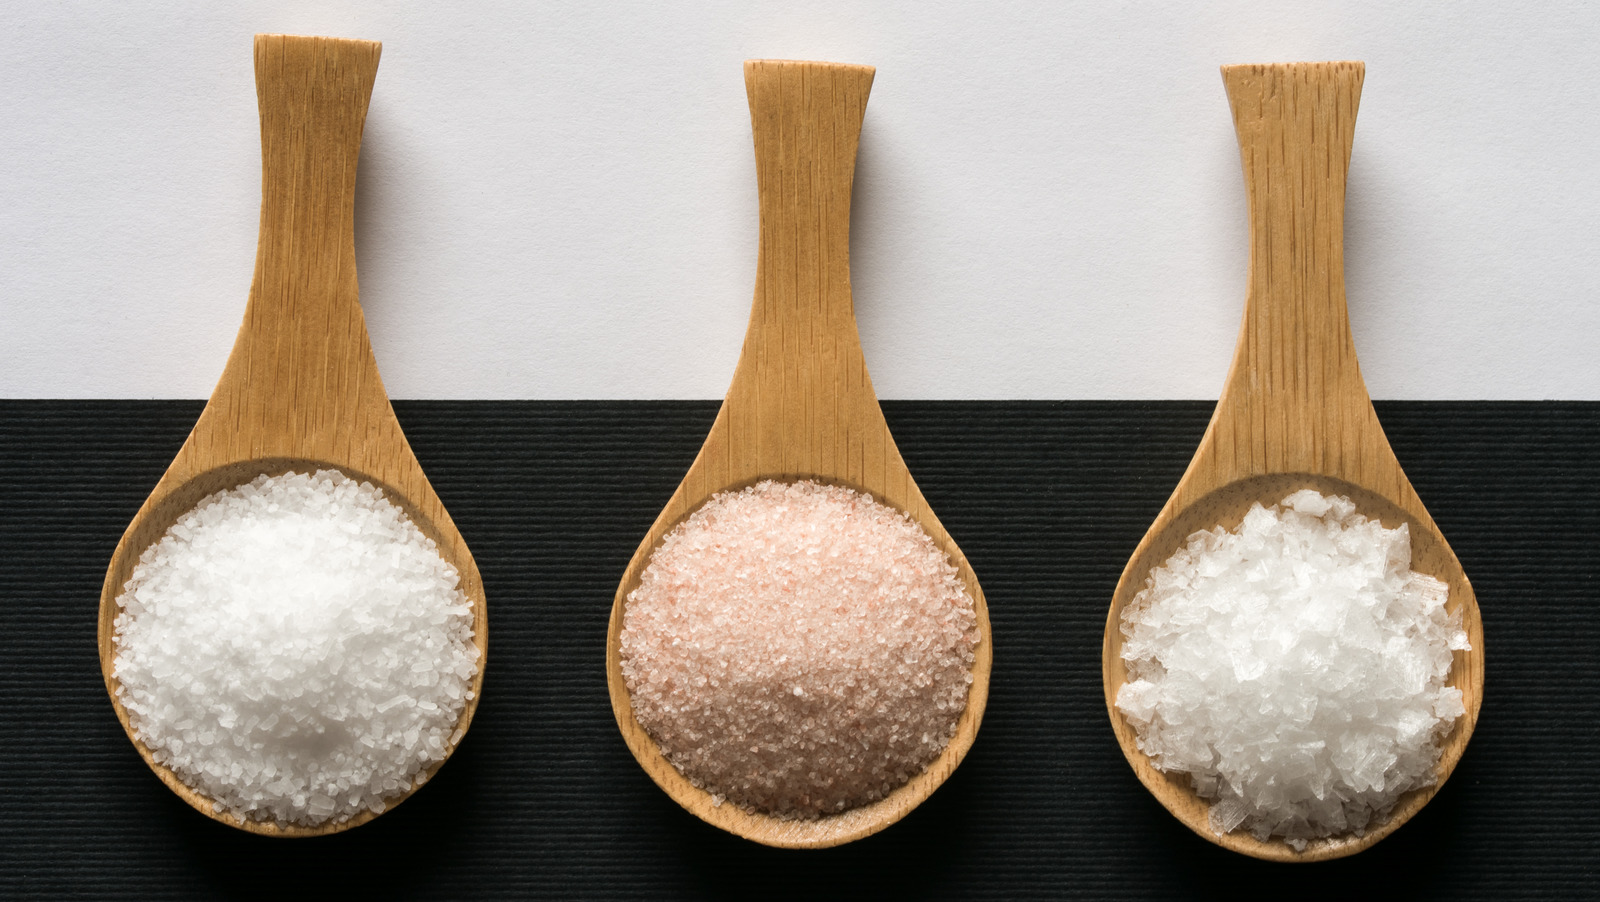 Is There A 'Healthiest' Kind Of Salt?